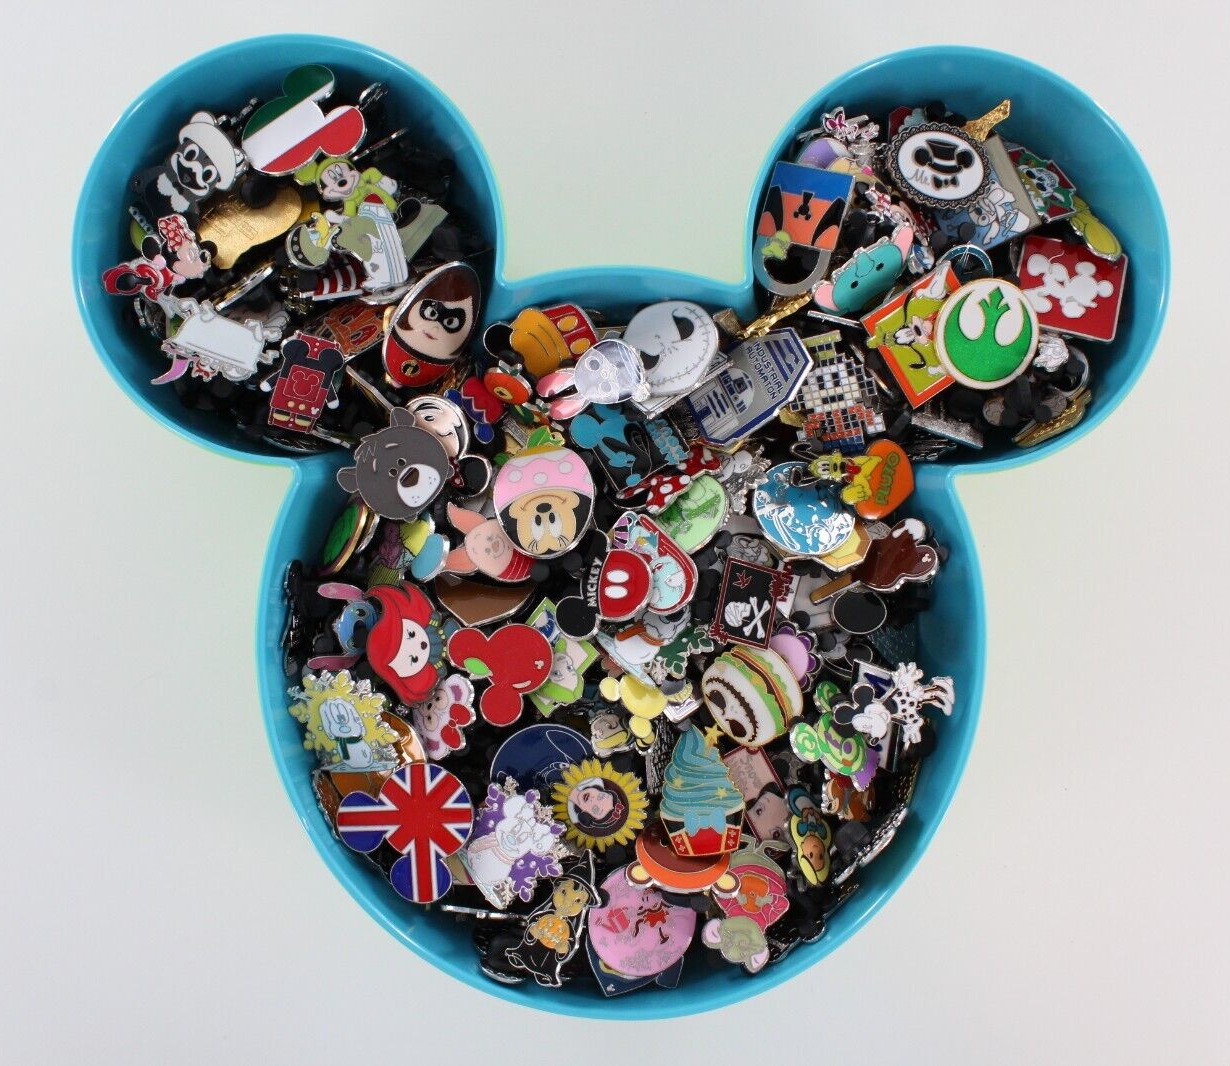 Disney Pins Lot You Pick Size From 1-500  Up to 500 pieces with NO DOUBLES